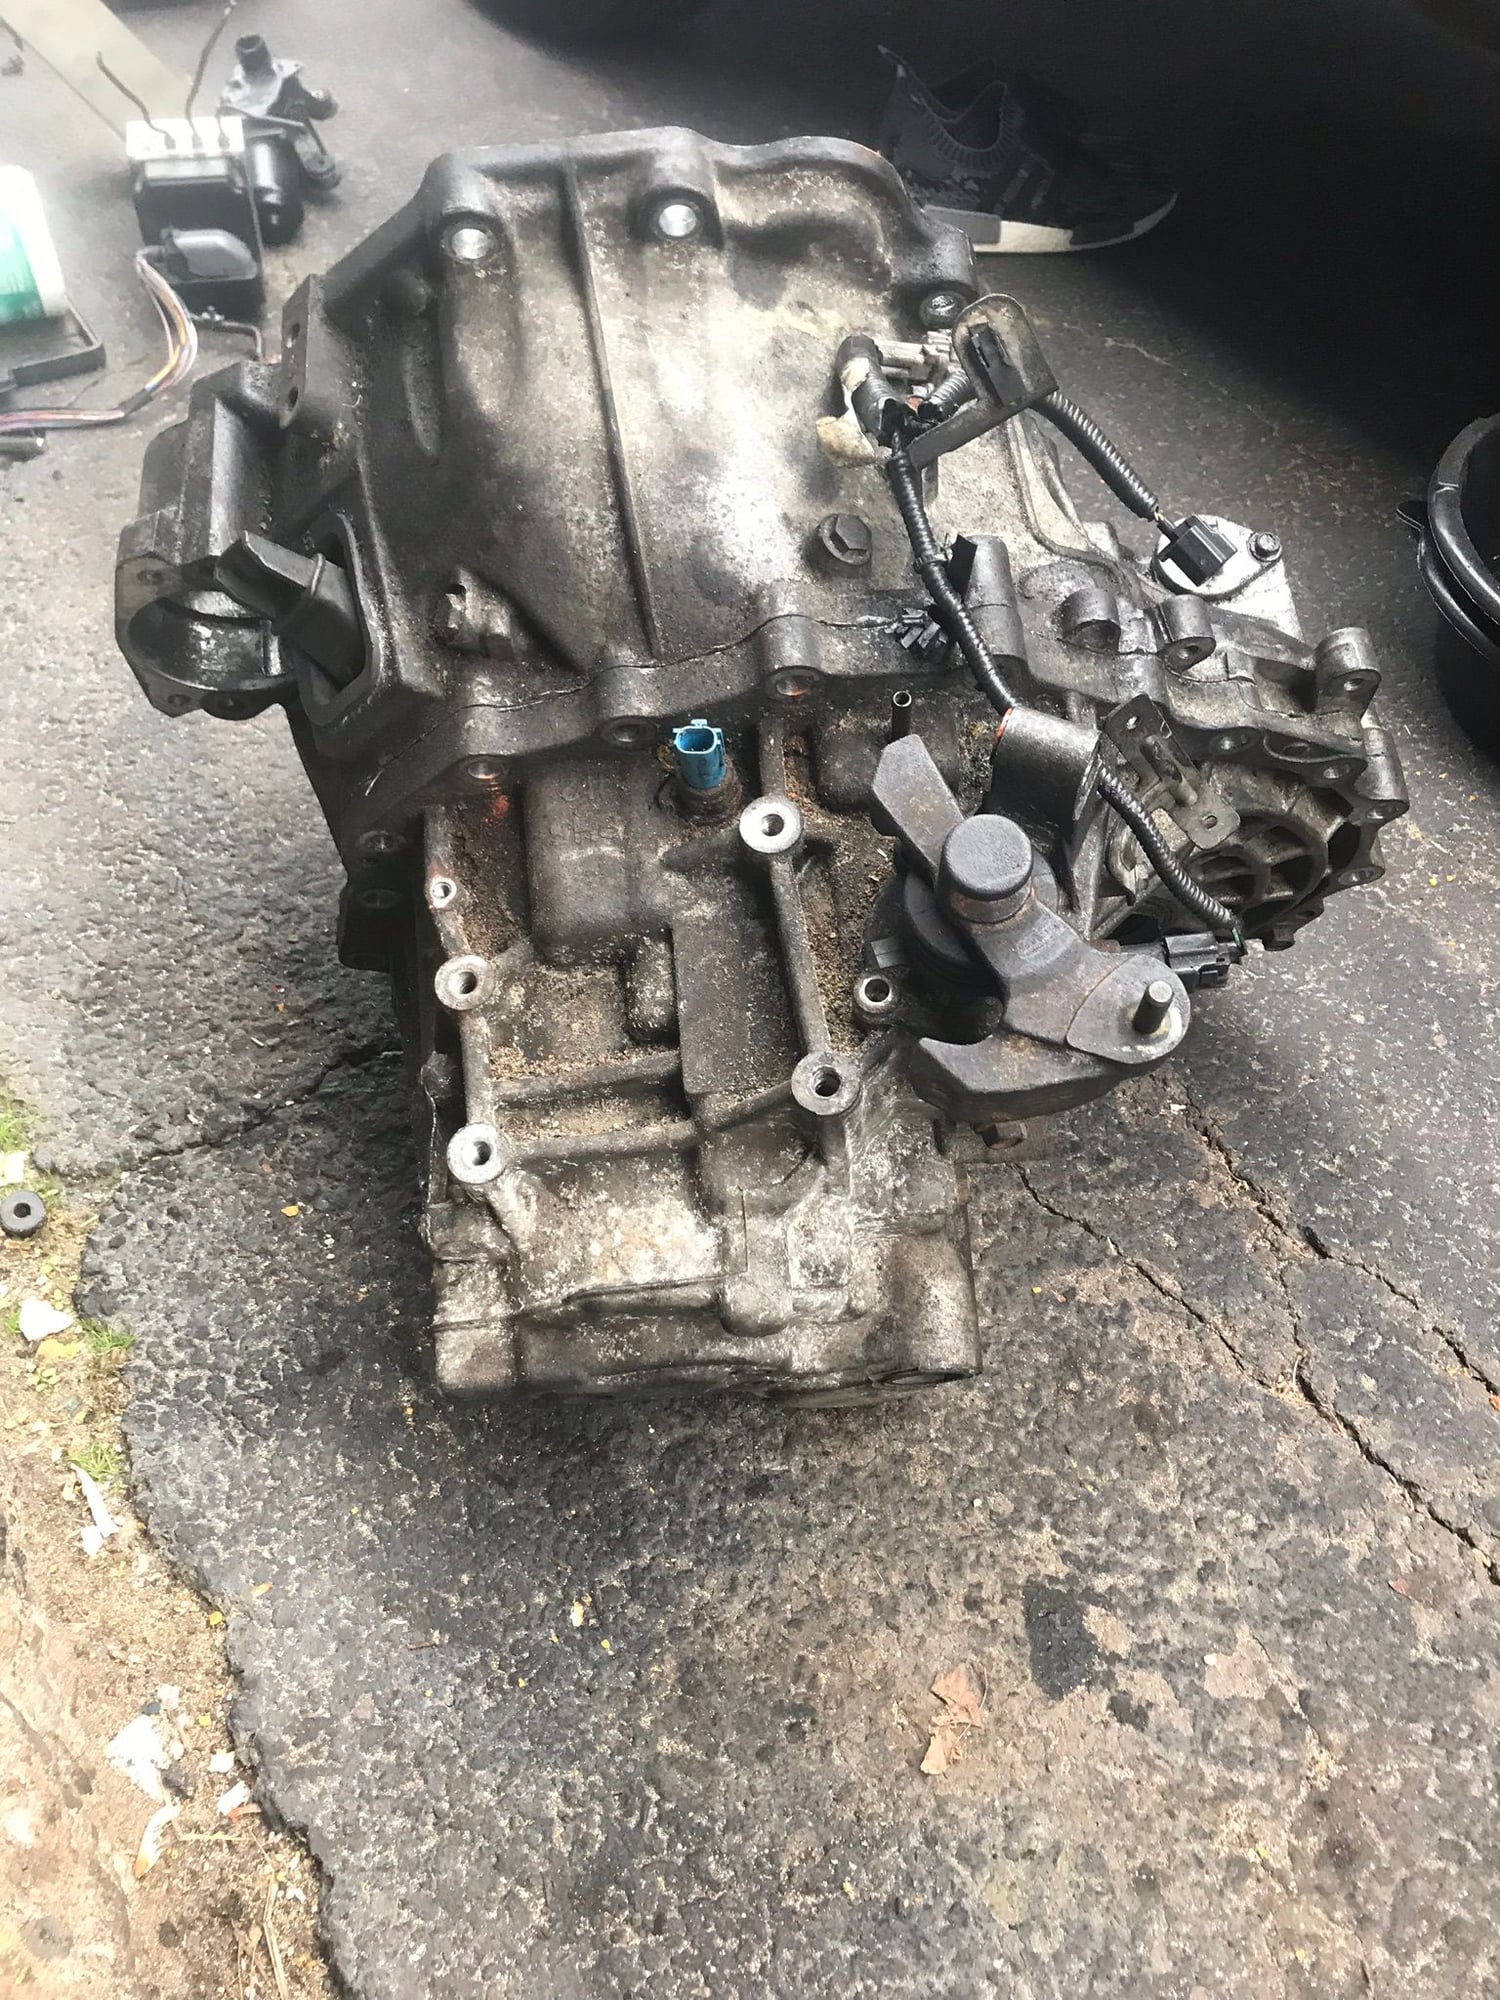 2003 Nissan Maxima 3.5 6 speed transmission and clutch